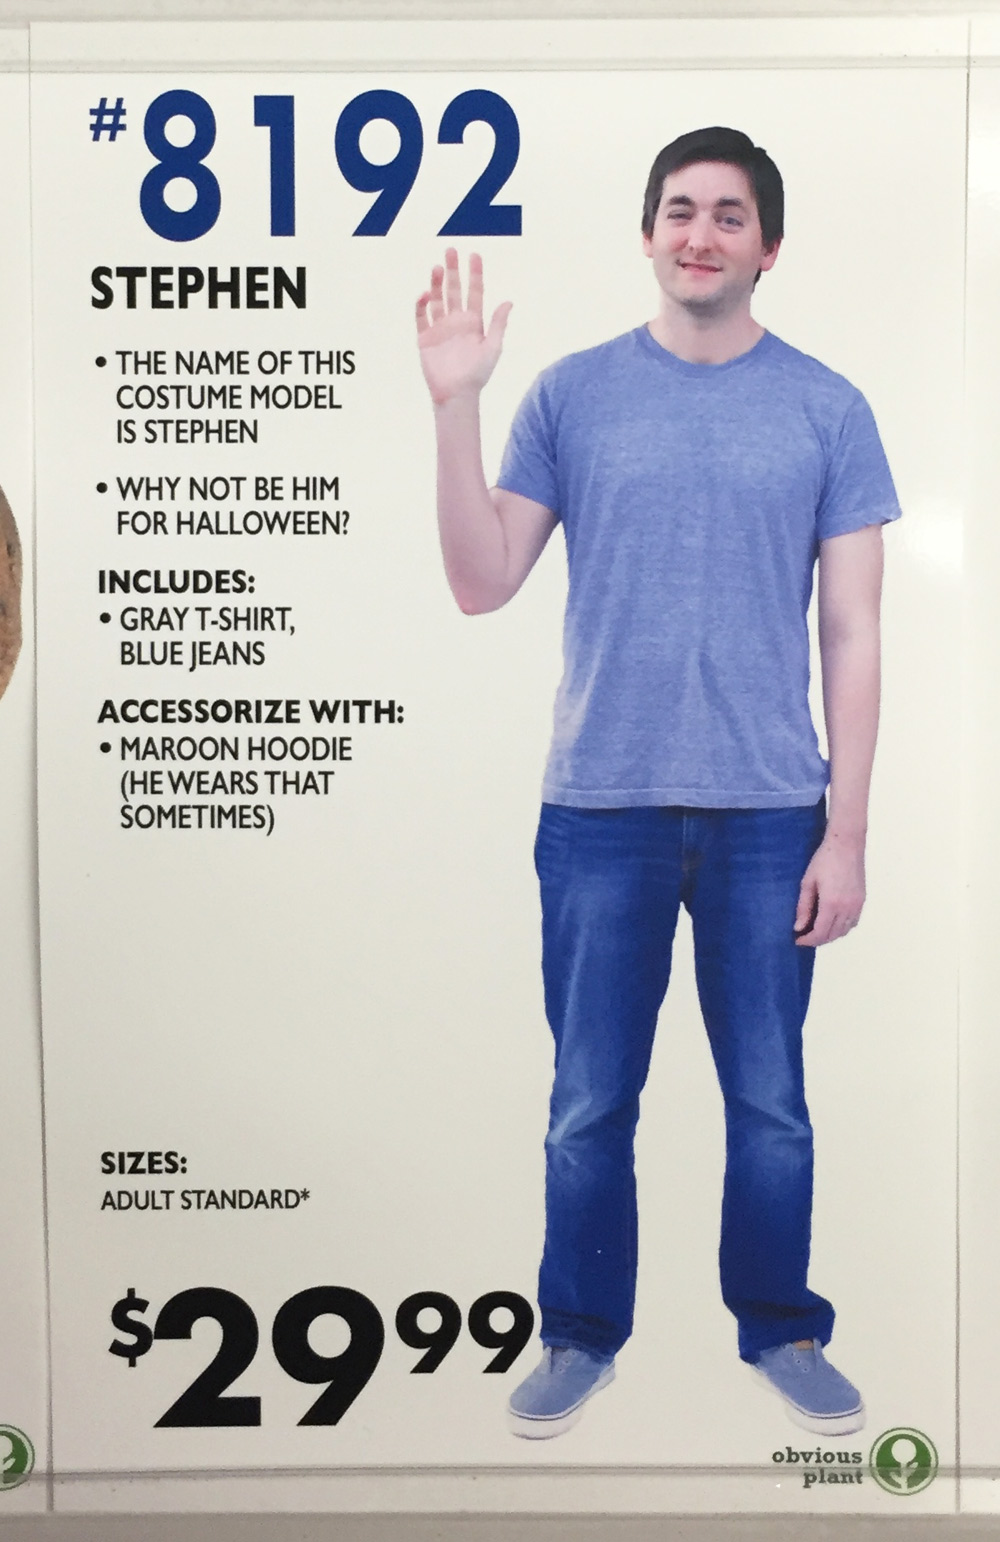 fake halloween costumes - Stephen The Name Of This Costume Model Is Stephen Why Not Be Him For Halloween? Includes Gray TShirt, Blue Jeans Accessorize With Maroon Hoodie He Wears That Sometimes Sizes Adult Standard obvious plant